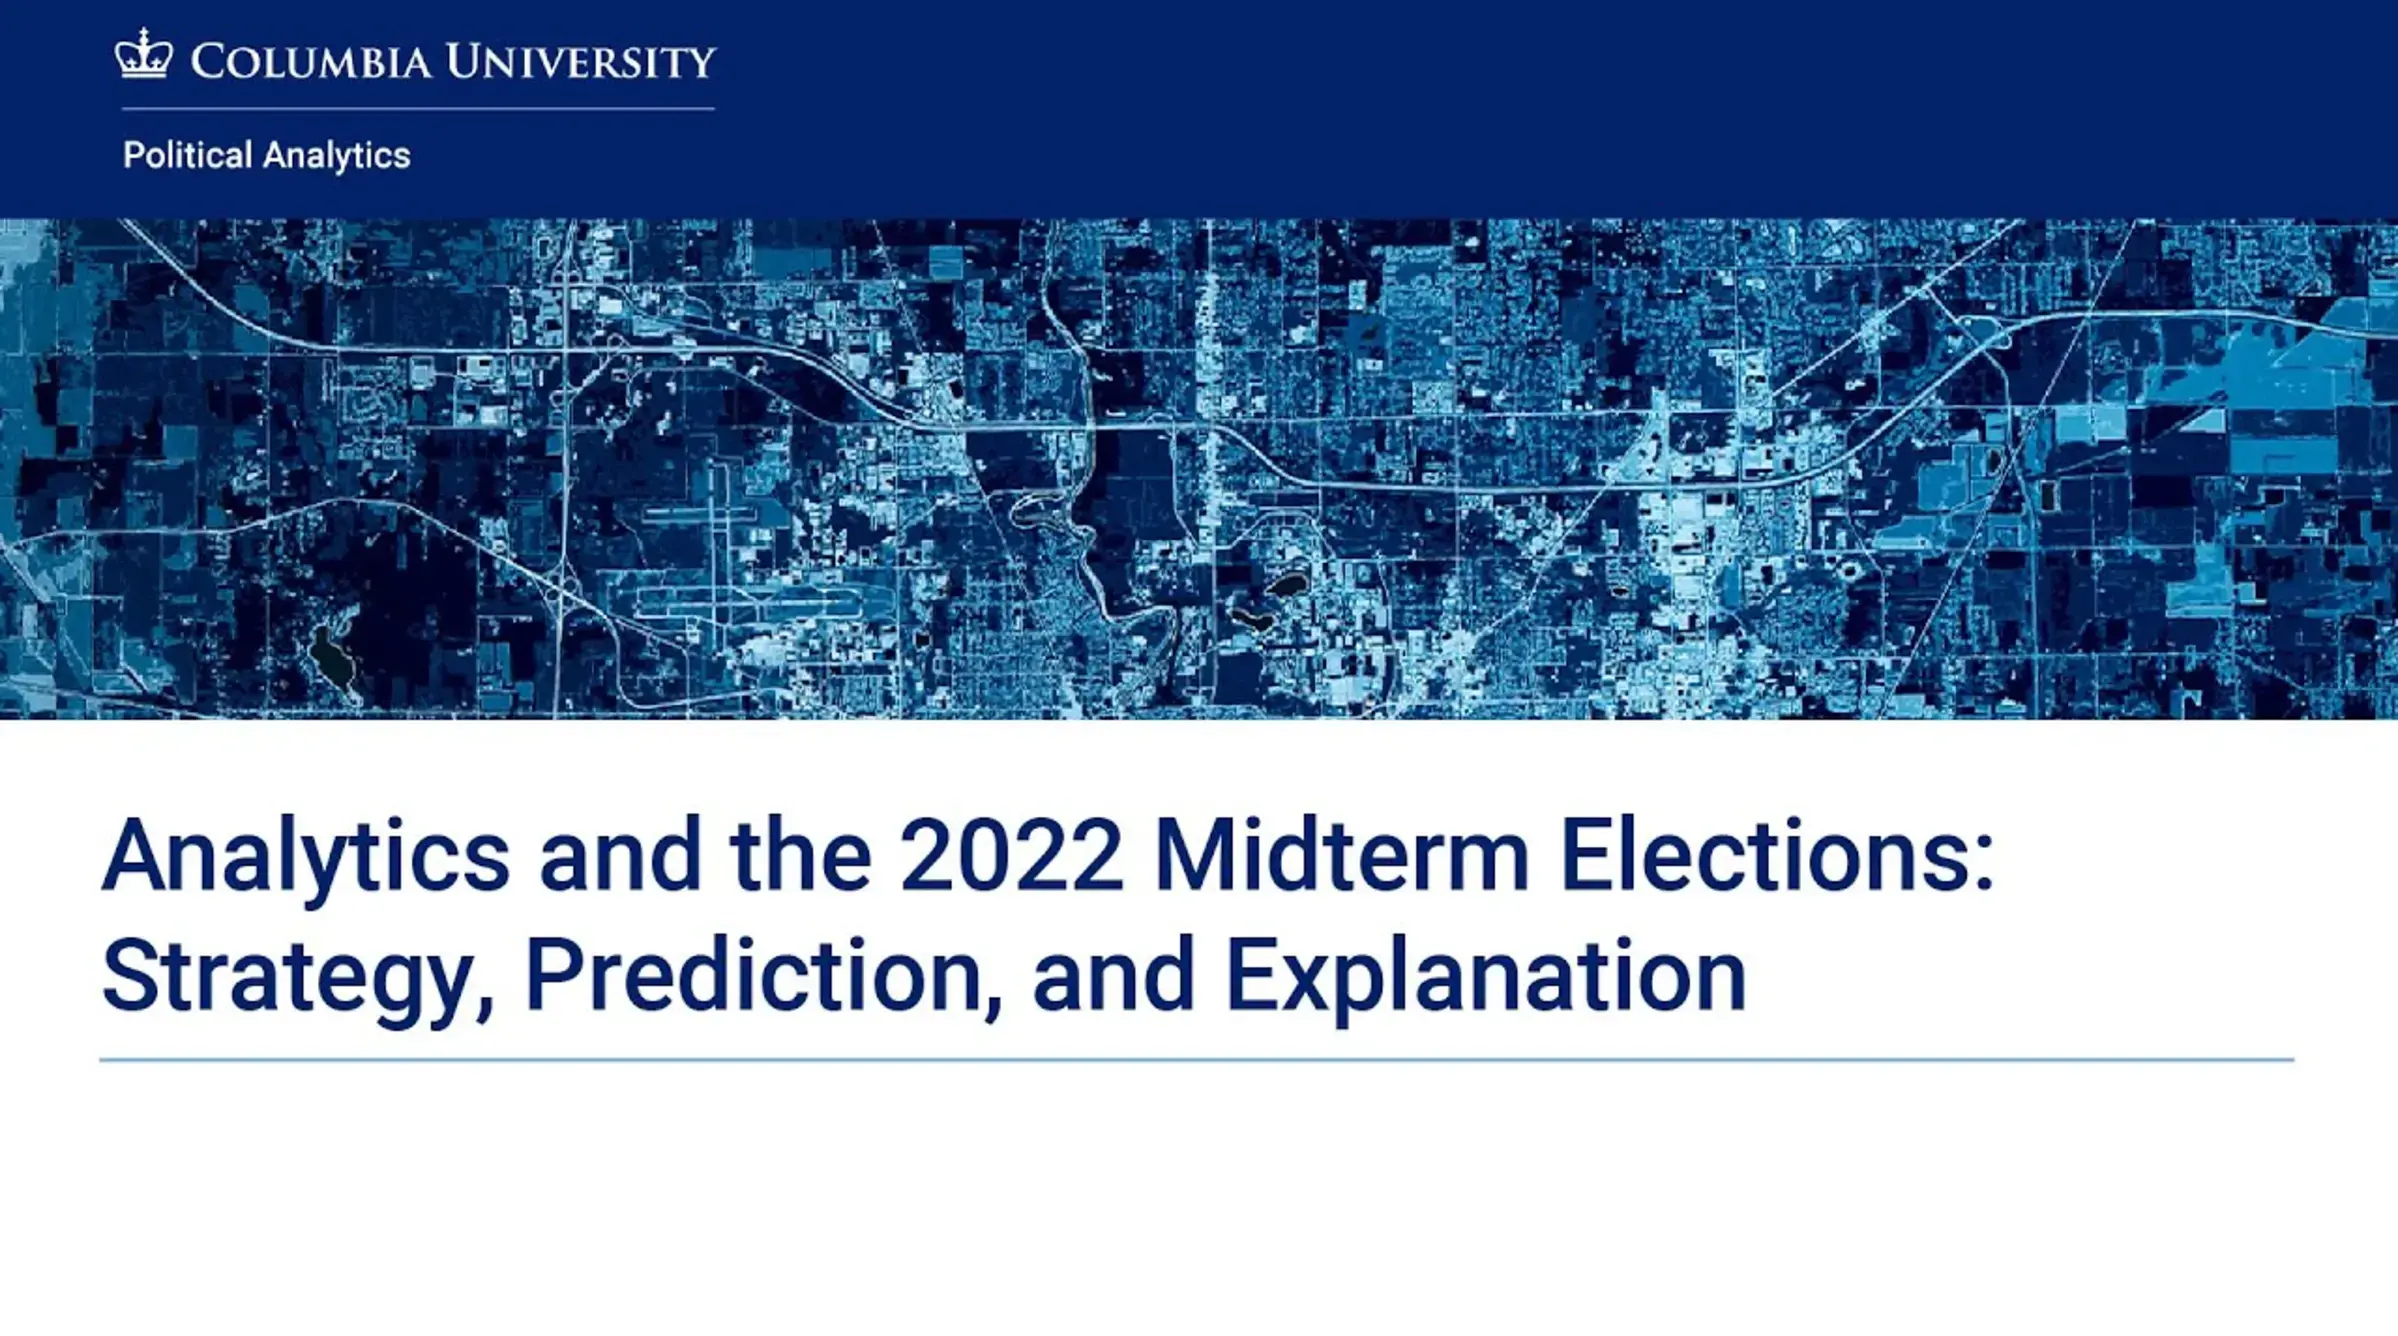 Analytics and the 2022 Midterm Elections: Strategy, Prediction, and Explanation